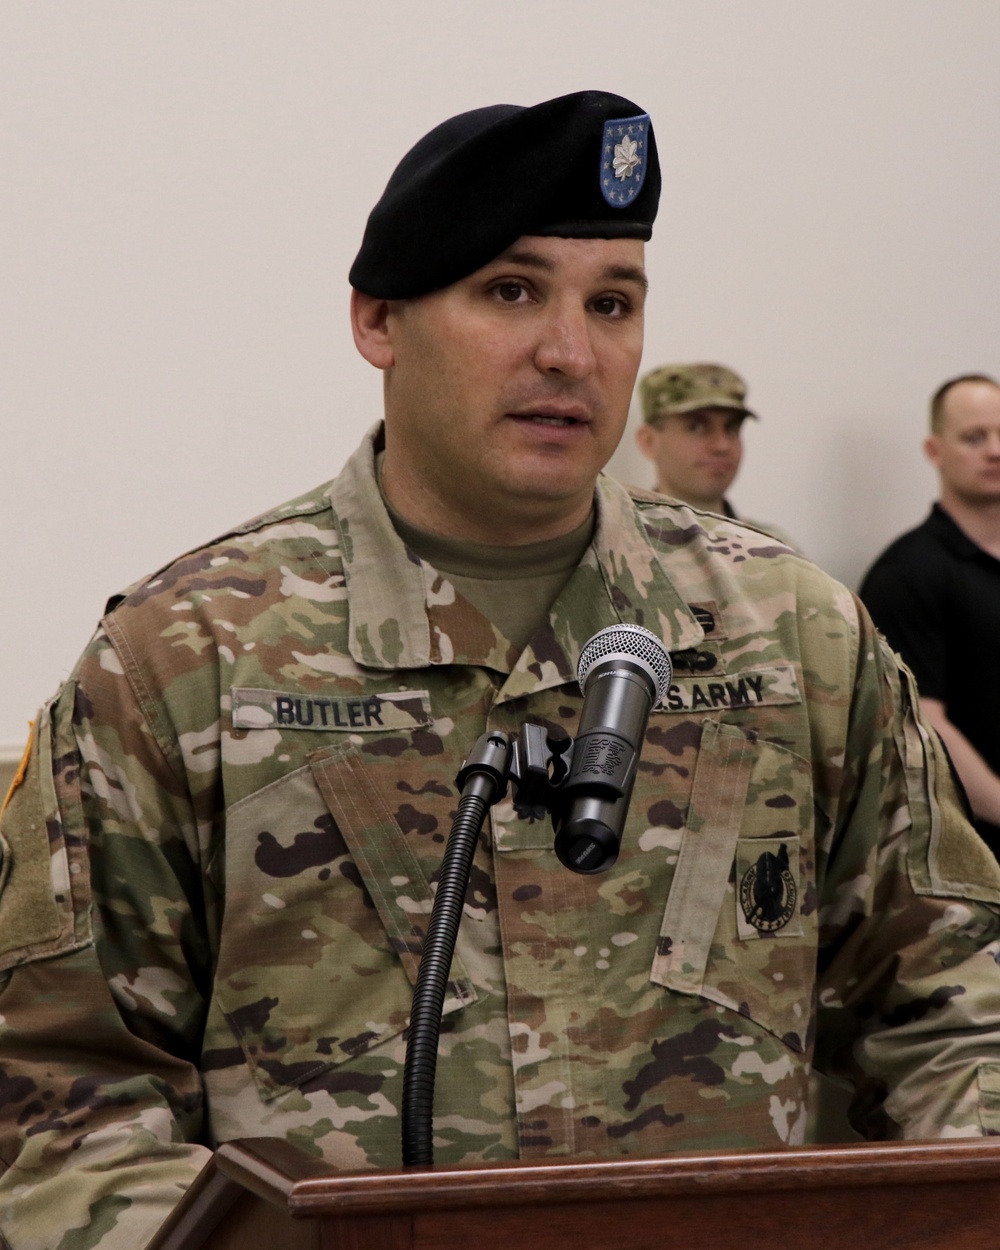 Dvids Images Kentucky Native Assumes Command Of Fort Campbell Warrior Transition Battalion